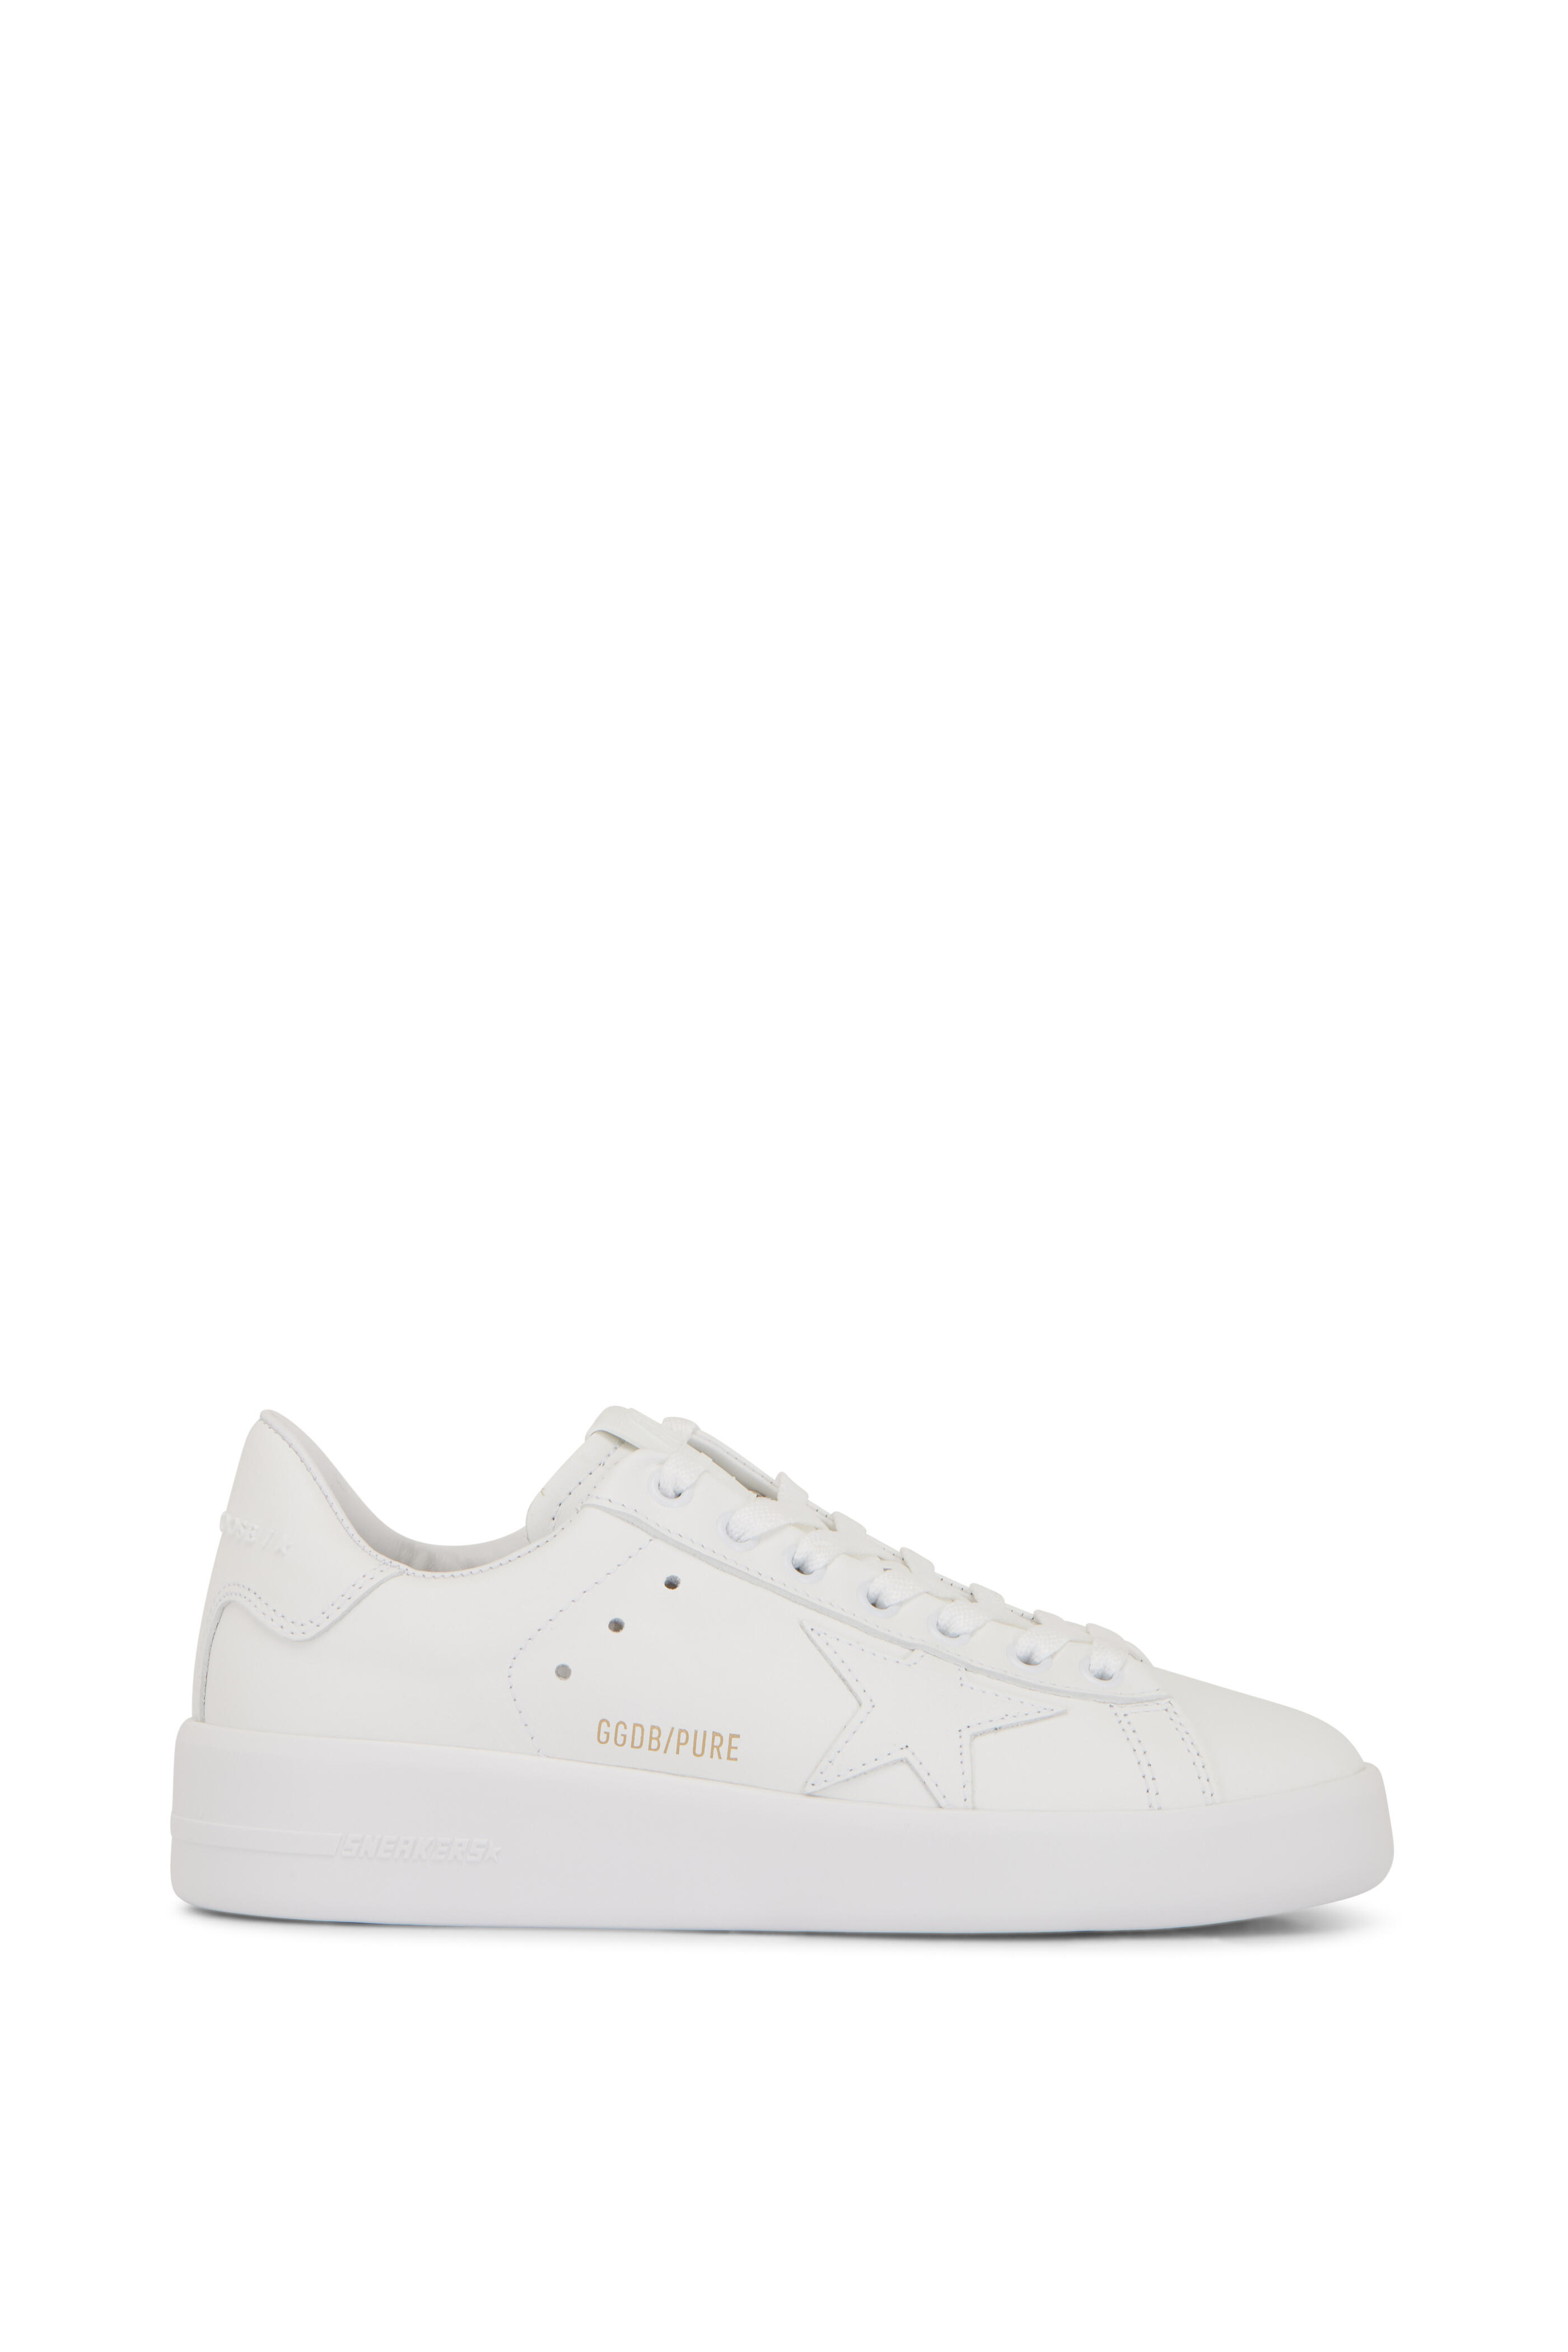 Golden Goose - Pure-Star Optic White Sneaker | Mitchell Stores